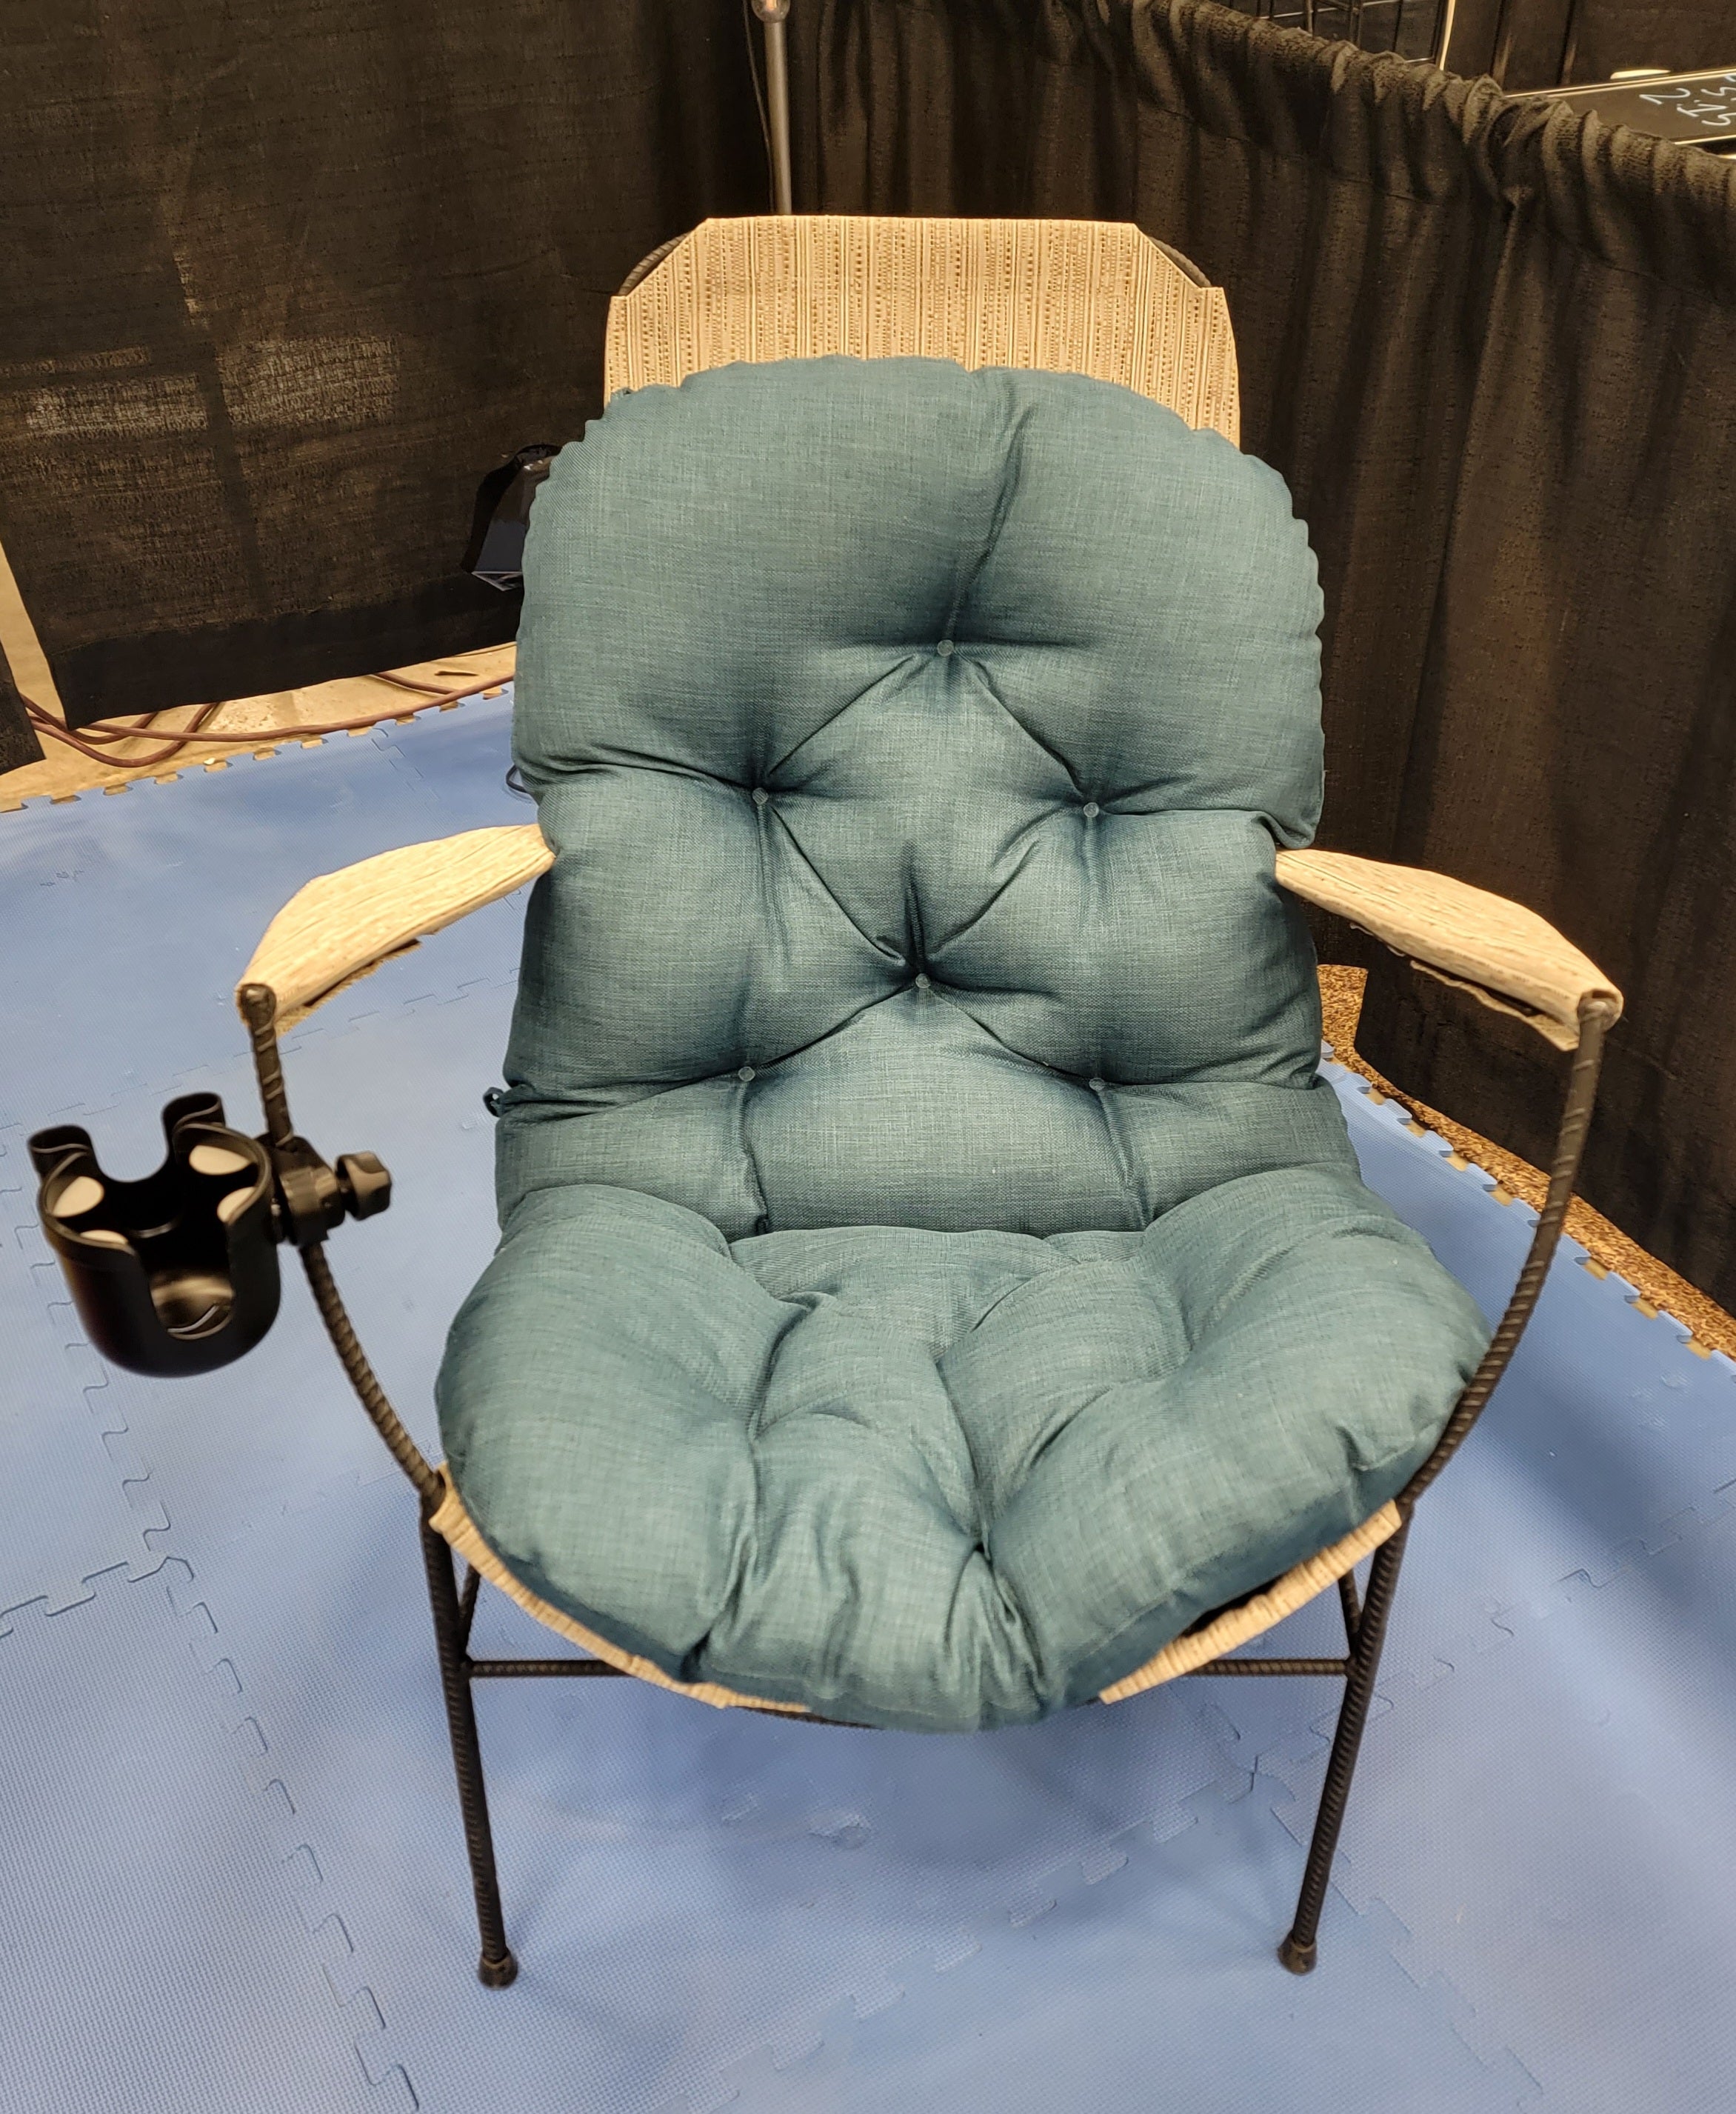 Meadow Rest Chair